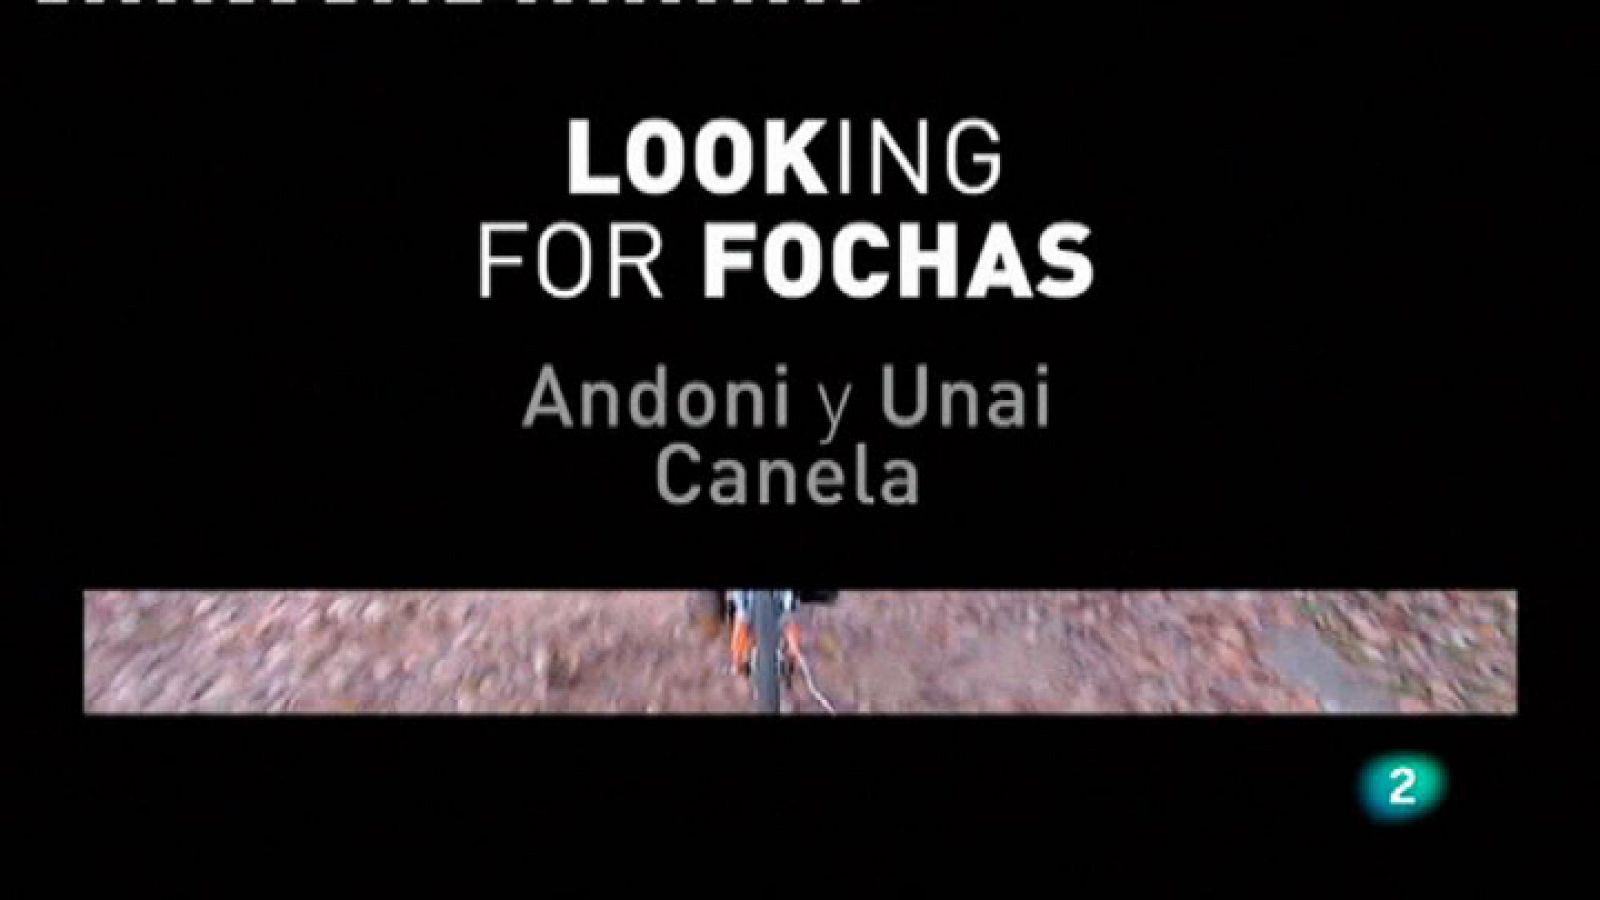 Continuarà...: "Looking for fochas" | RTVE Play